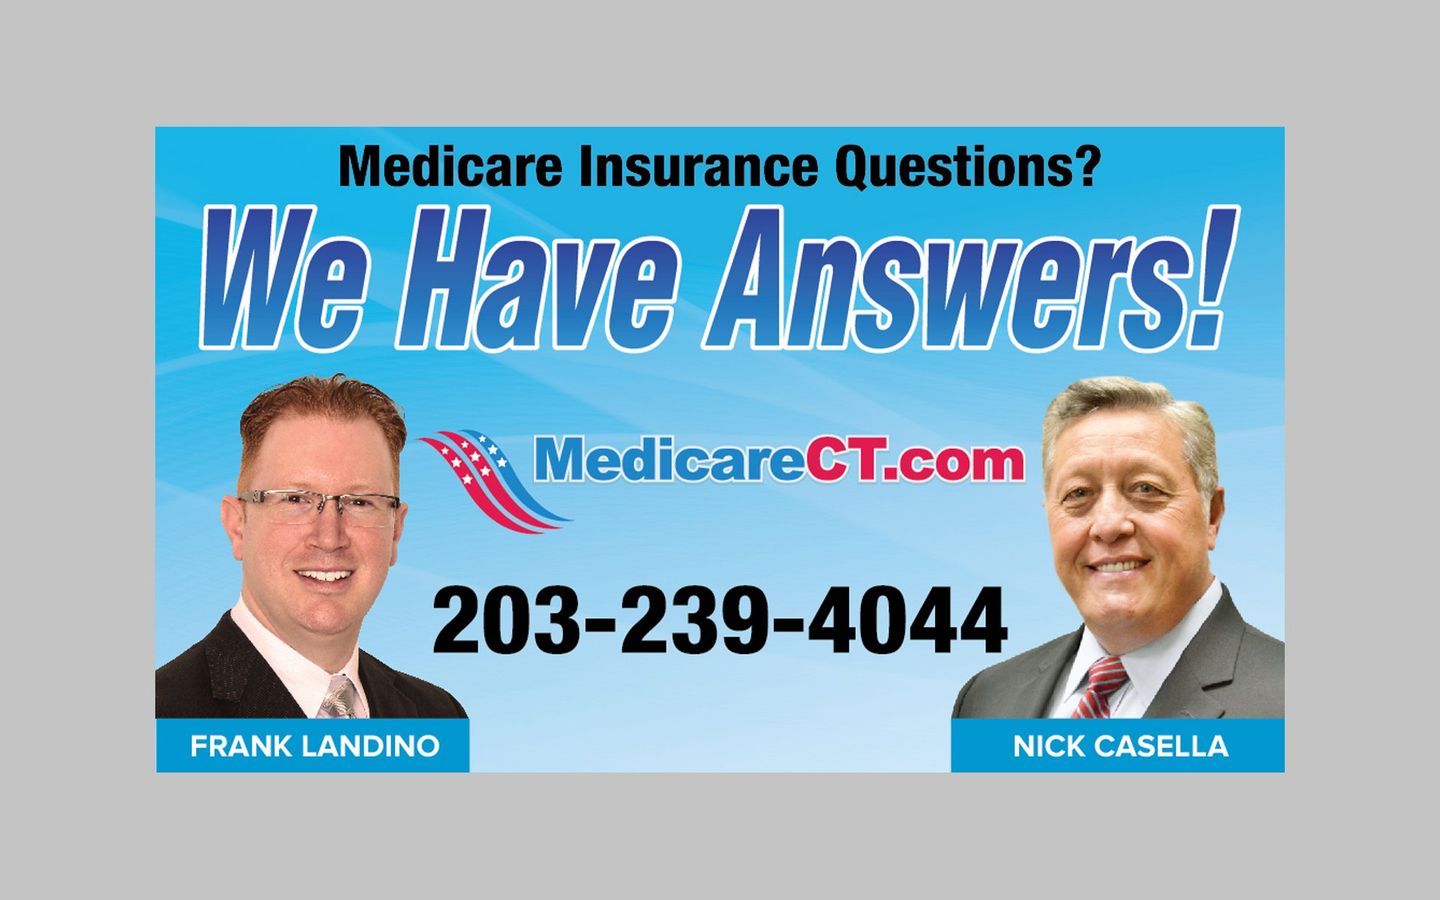 a billboard for medicare insurance questions with frank landino and nick casella